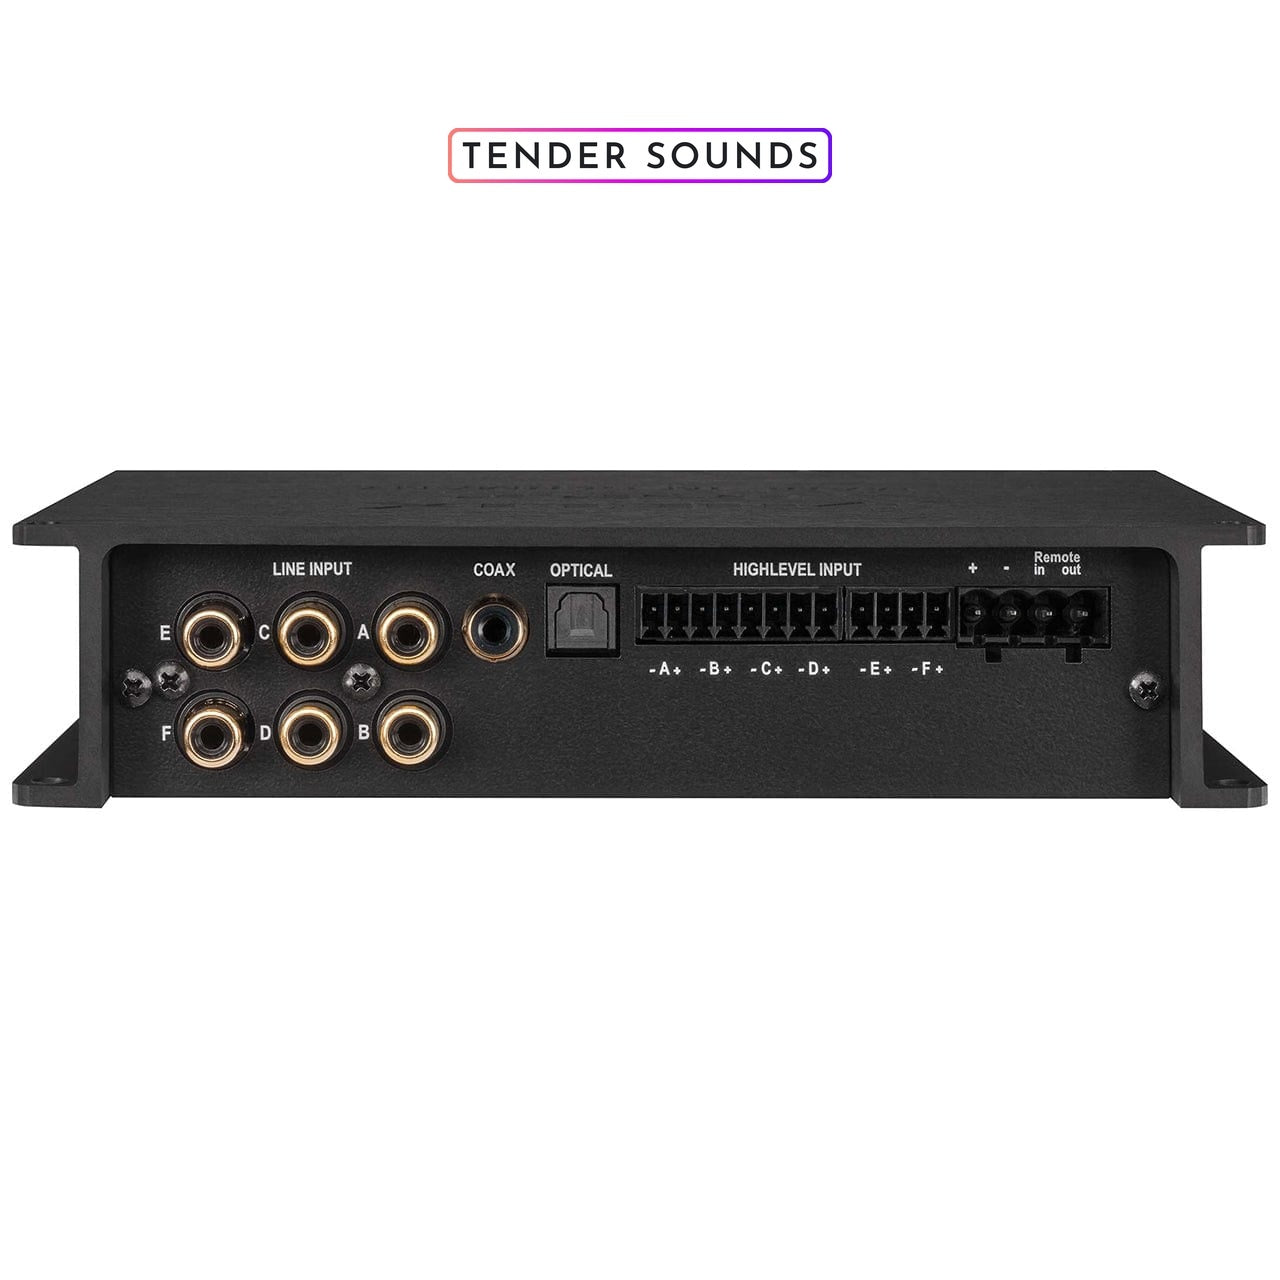 HELIX DSP.3s 8 channel signal processor with 48 kHz / 24 Bit signal path